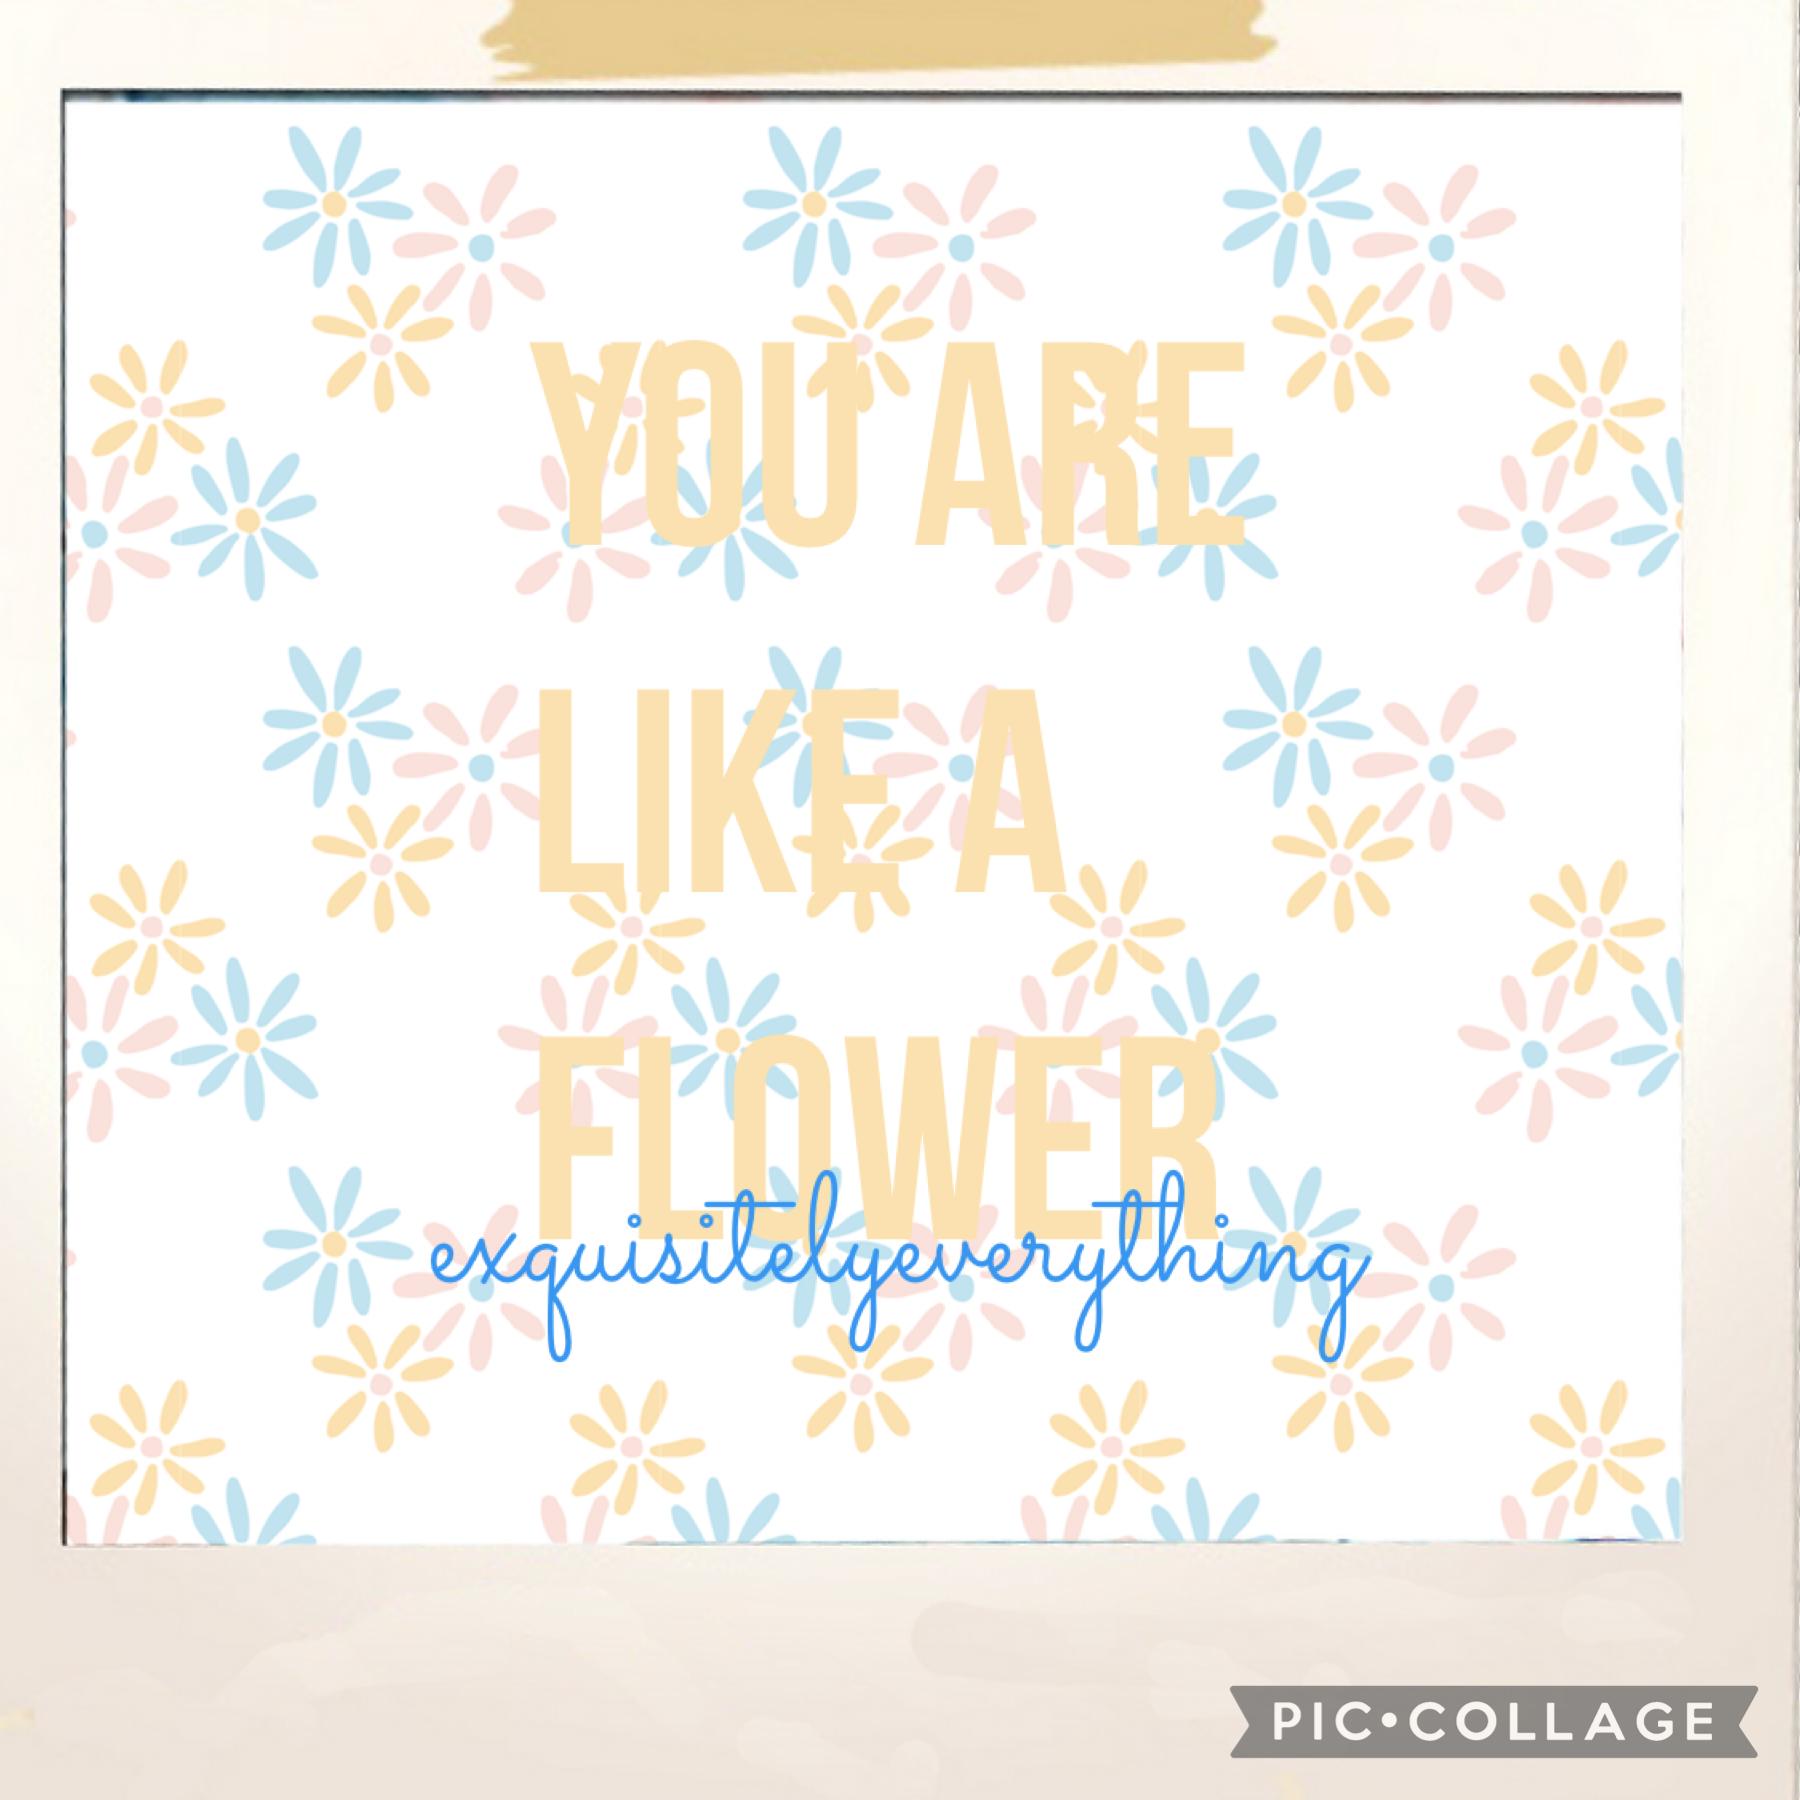 You are like a flower 